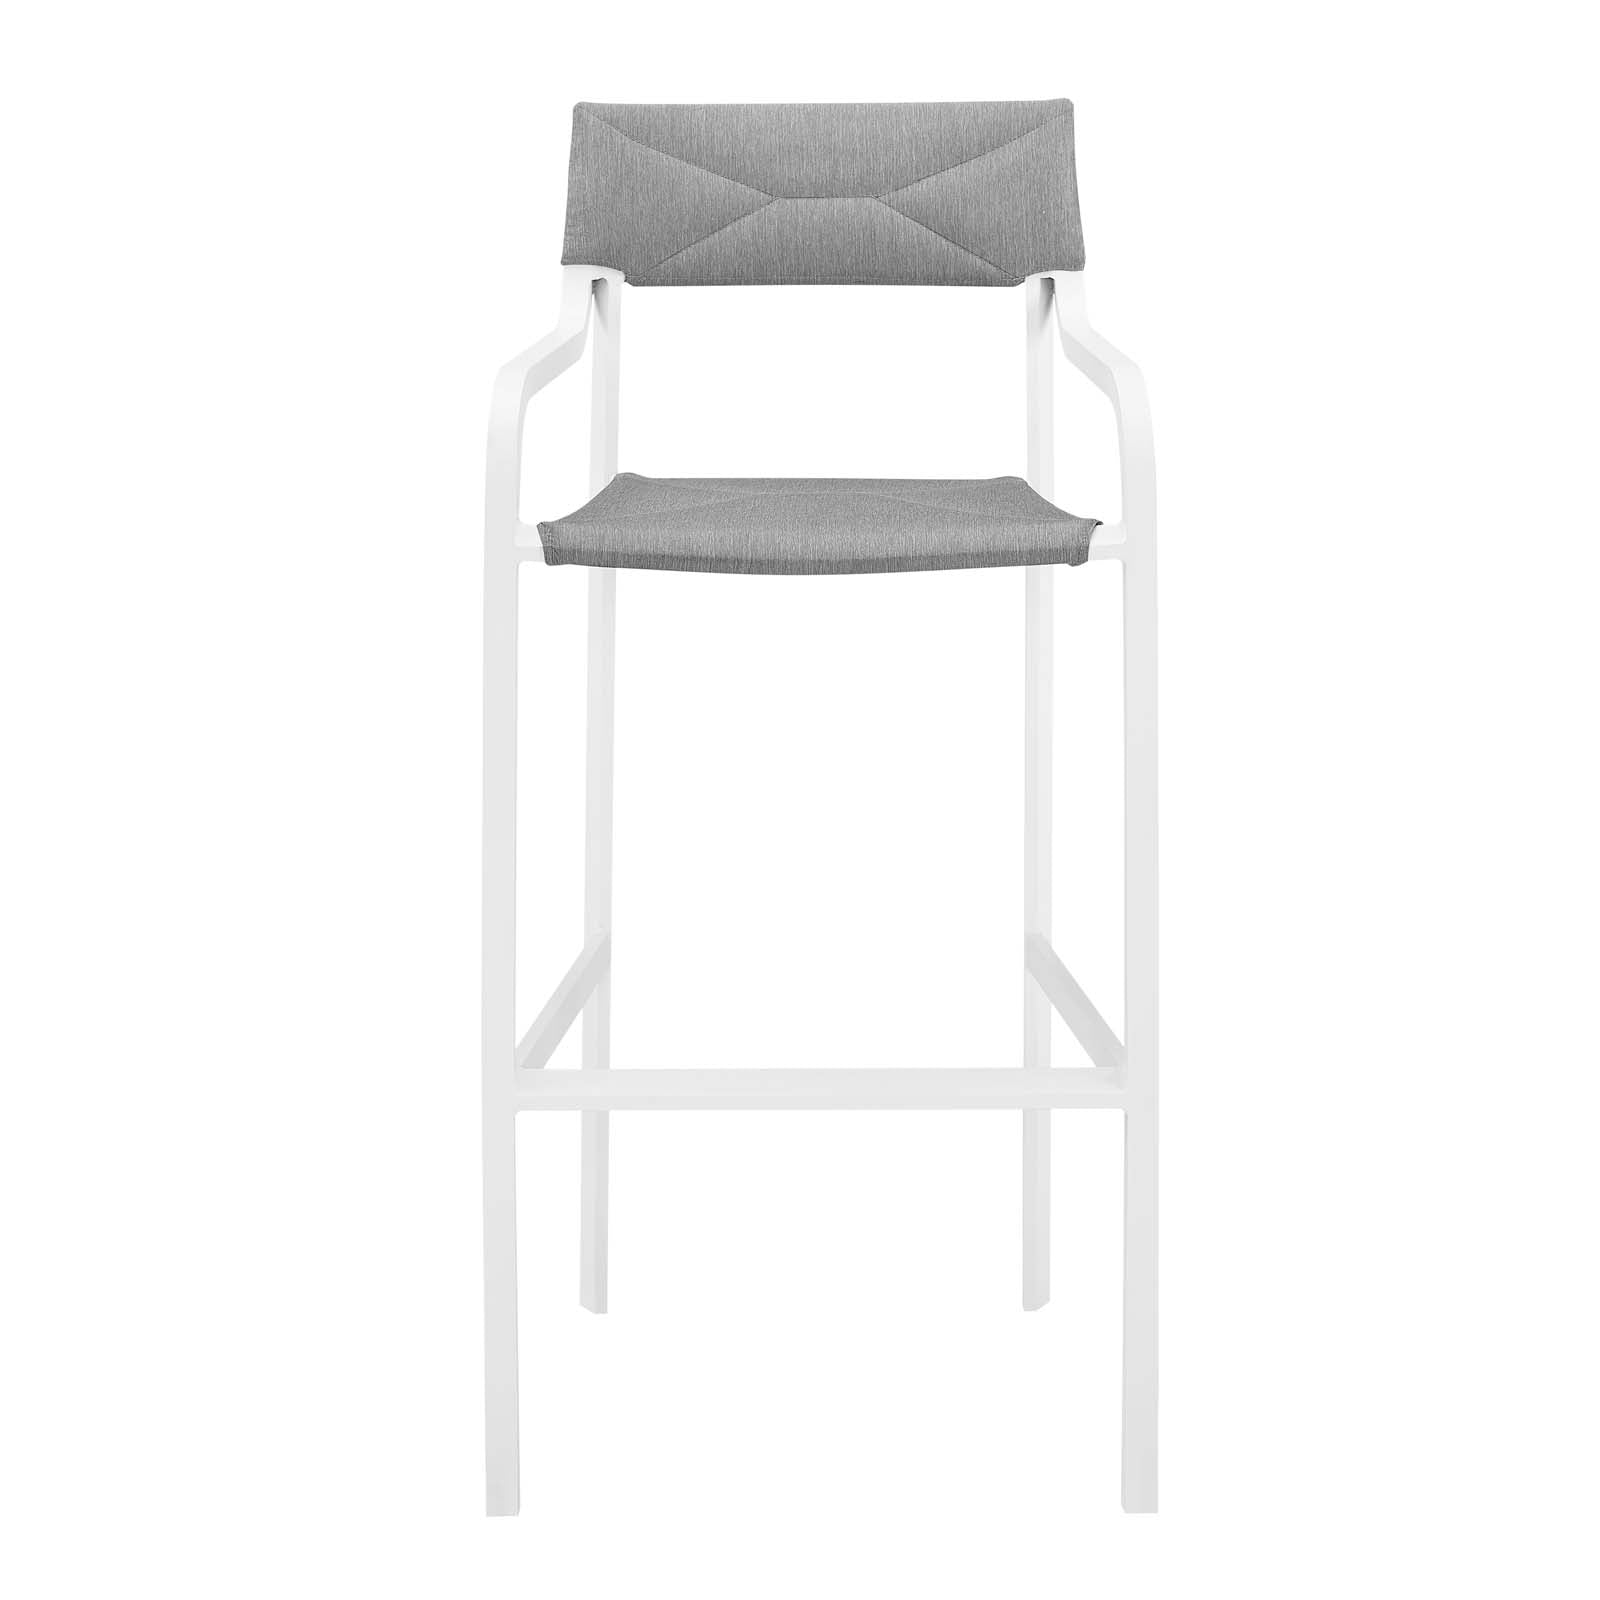 Modway Outdoor Barstools - Raleigh Outdoor Bar Stool White & Gray (Set of 2)